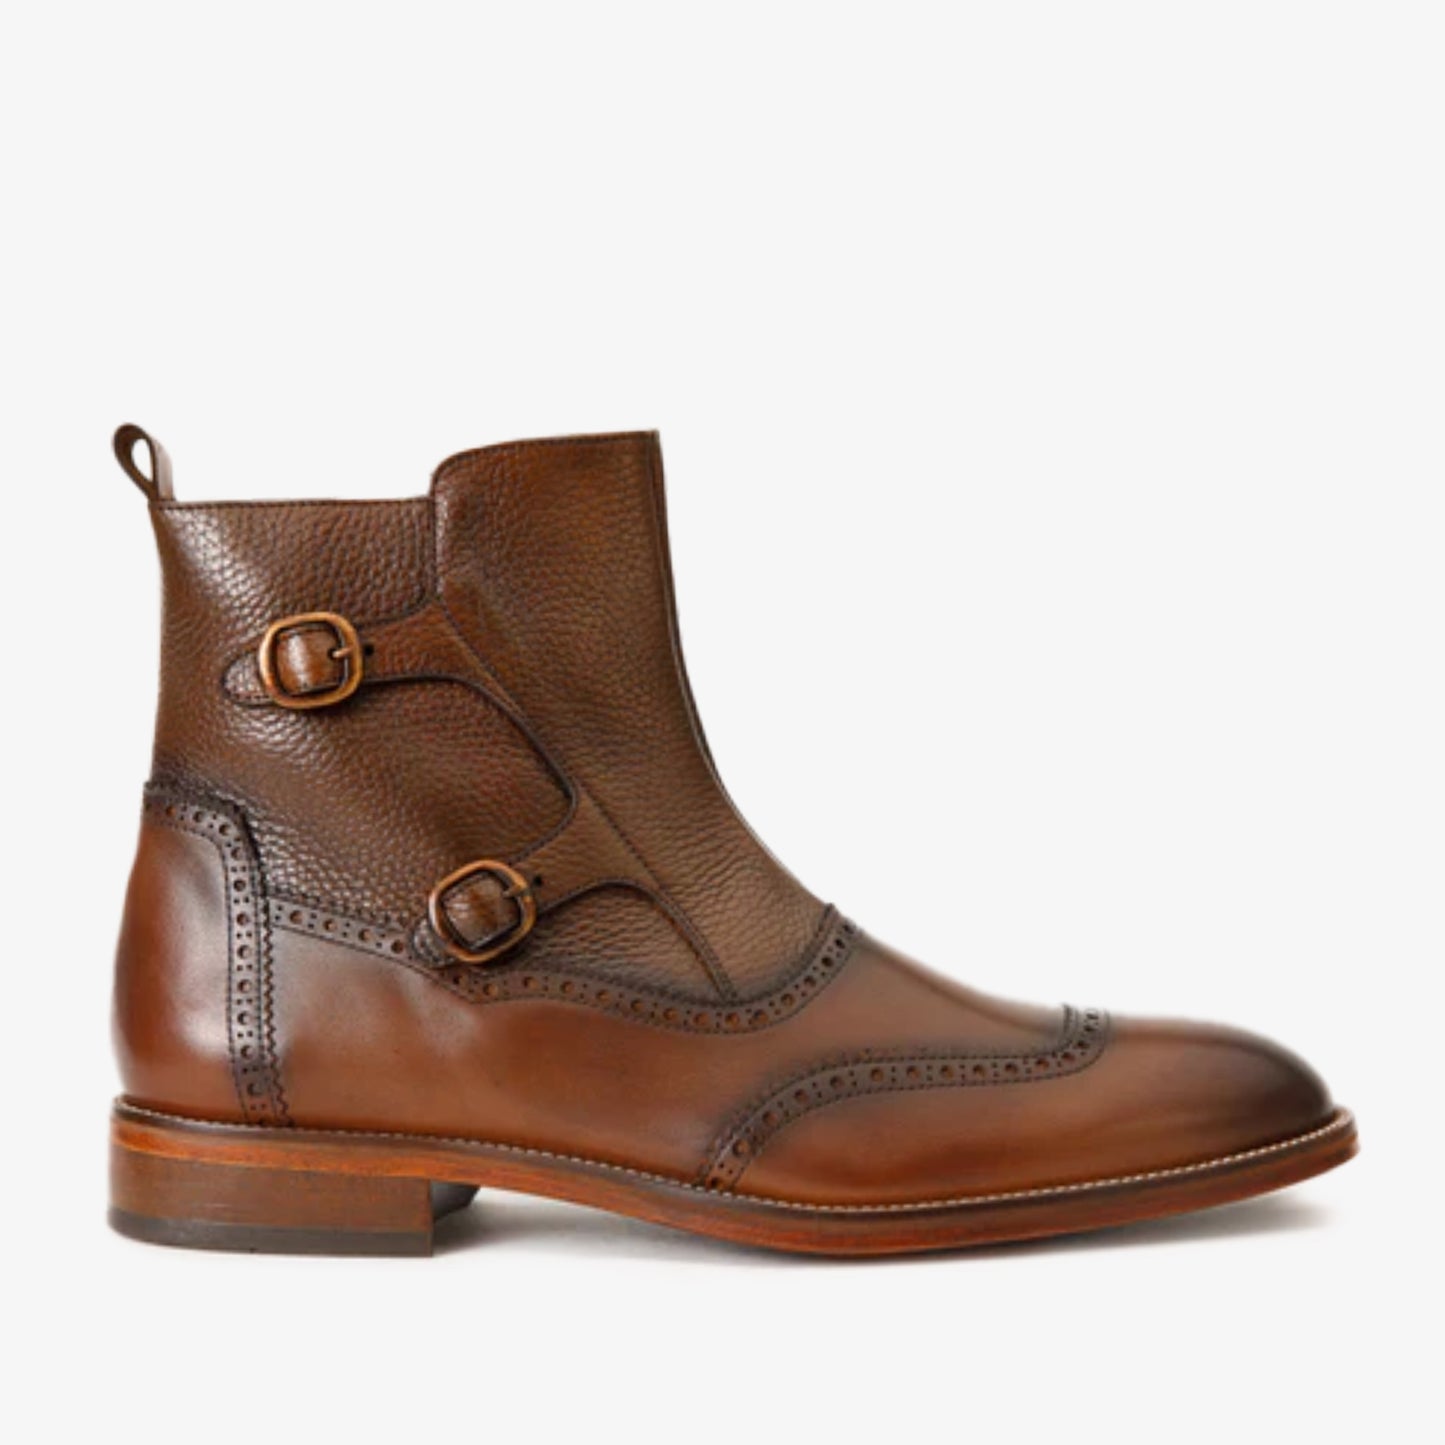 The Rand Brown Leather Double Buckle Brogue Men Boot with a Zipper